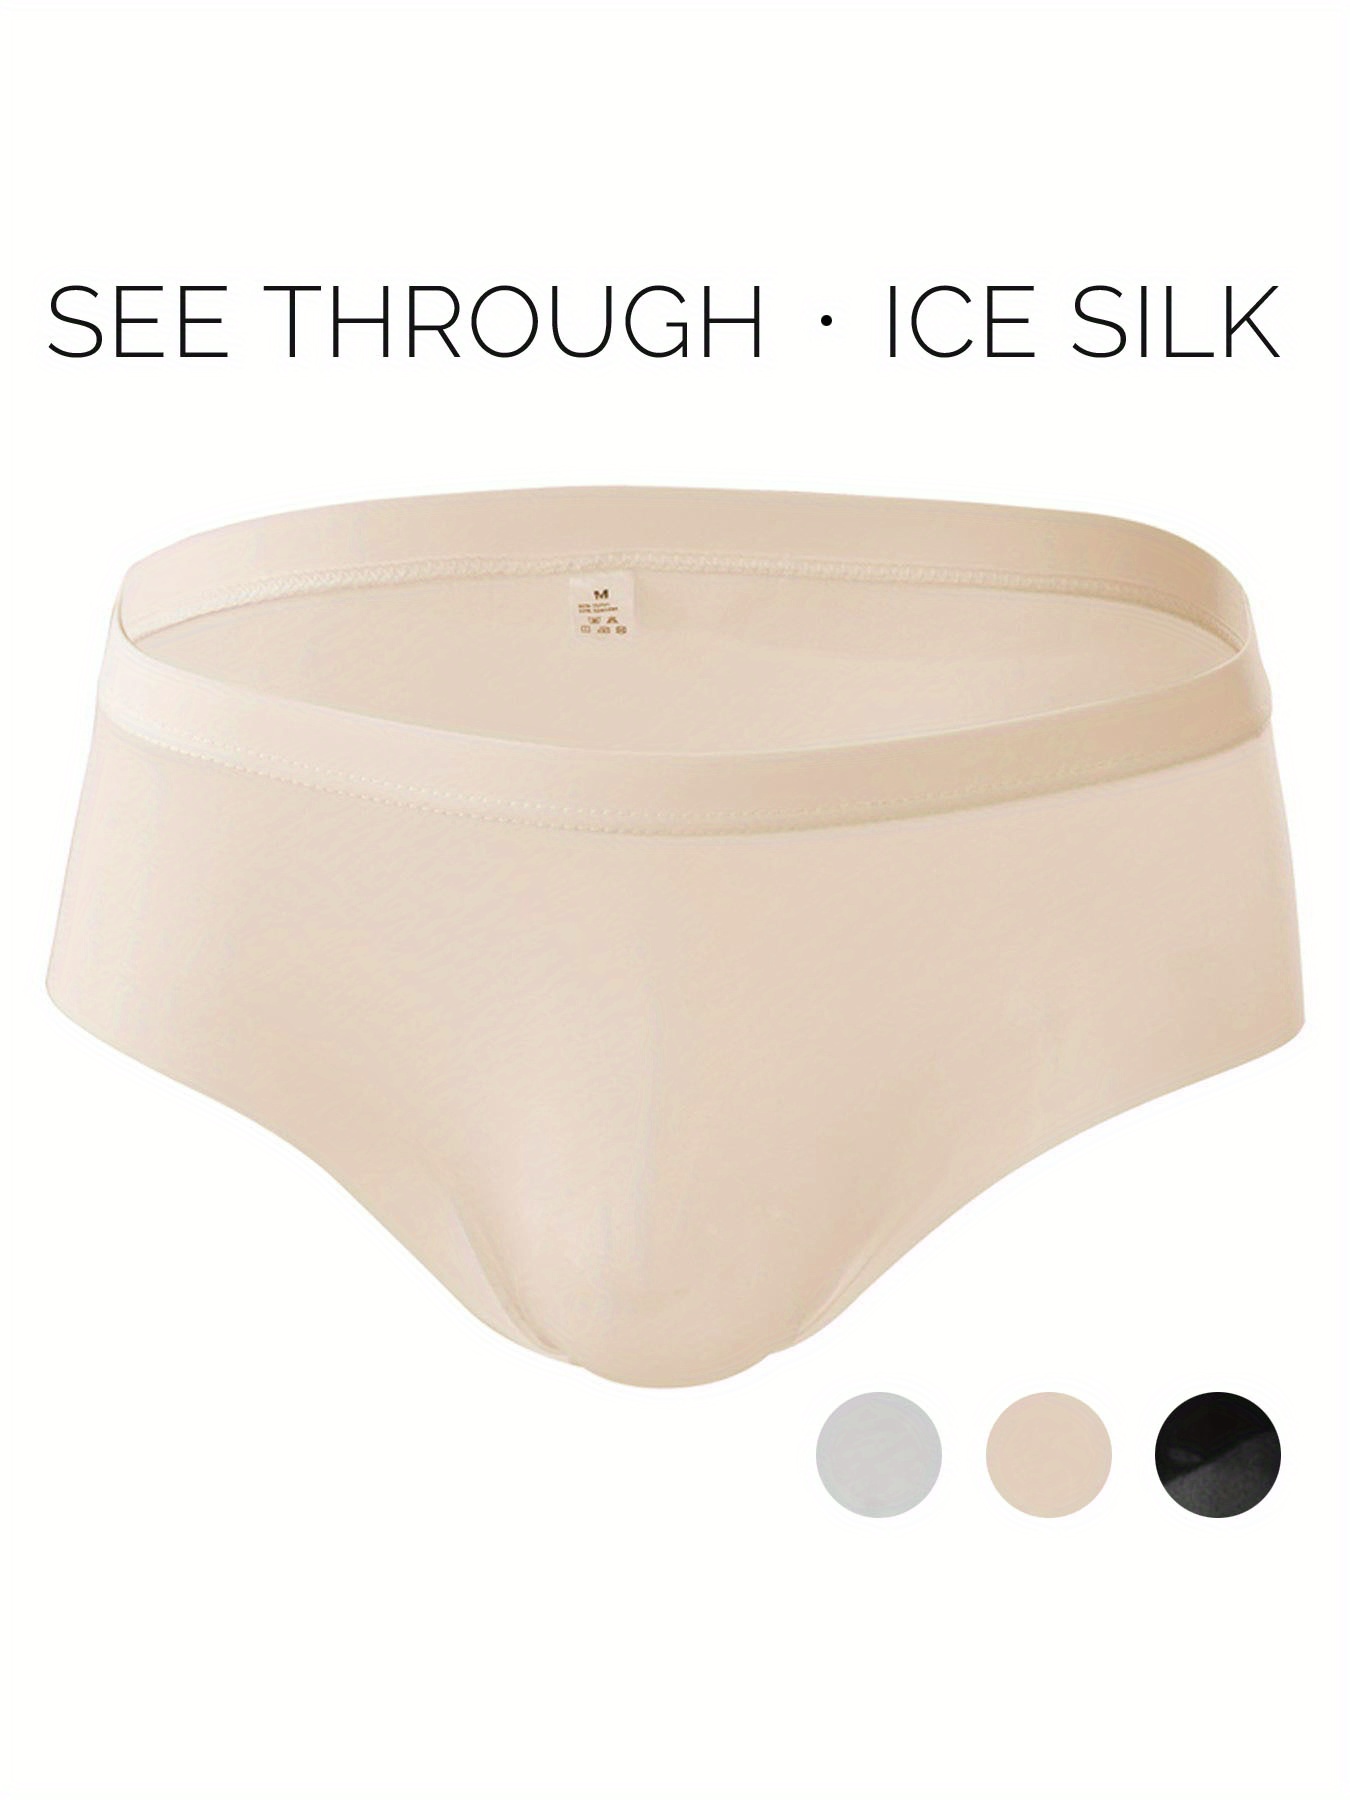 Ice Silk Briefs Mens Low-rise Sexy Underwear Breathable Underpants  See-through #